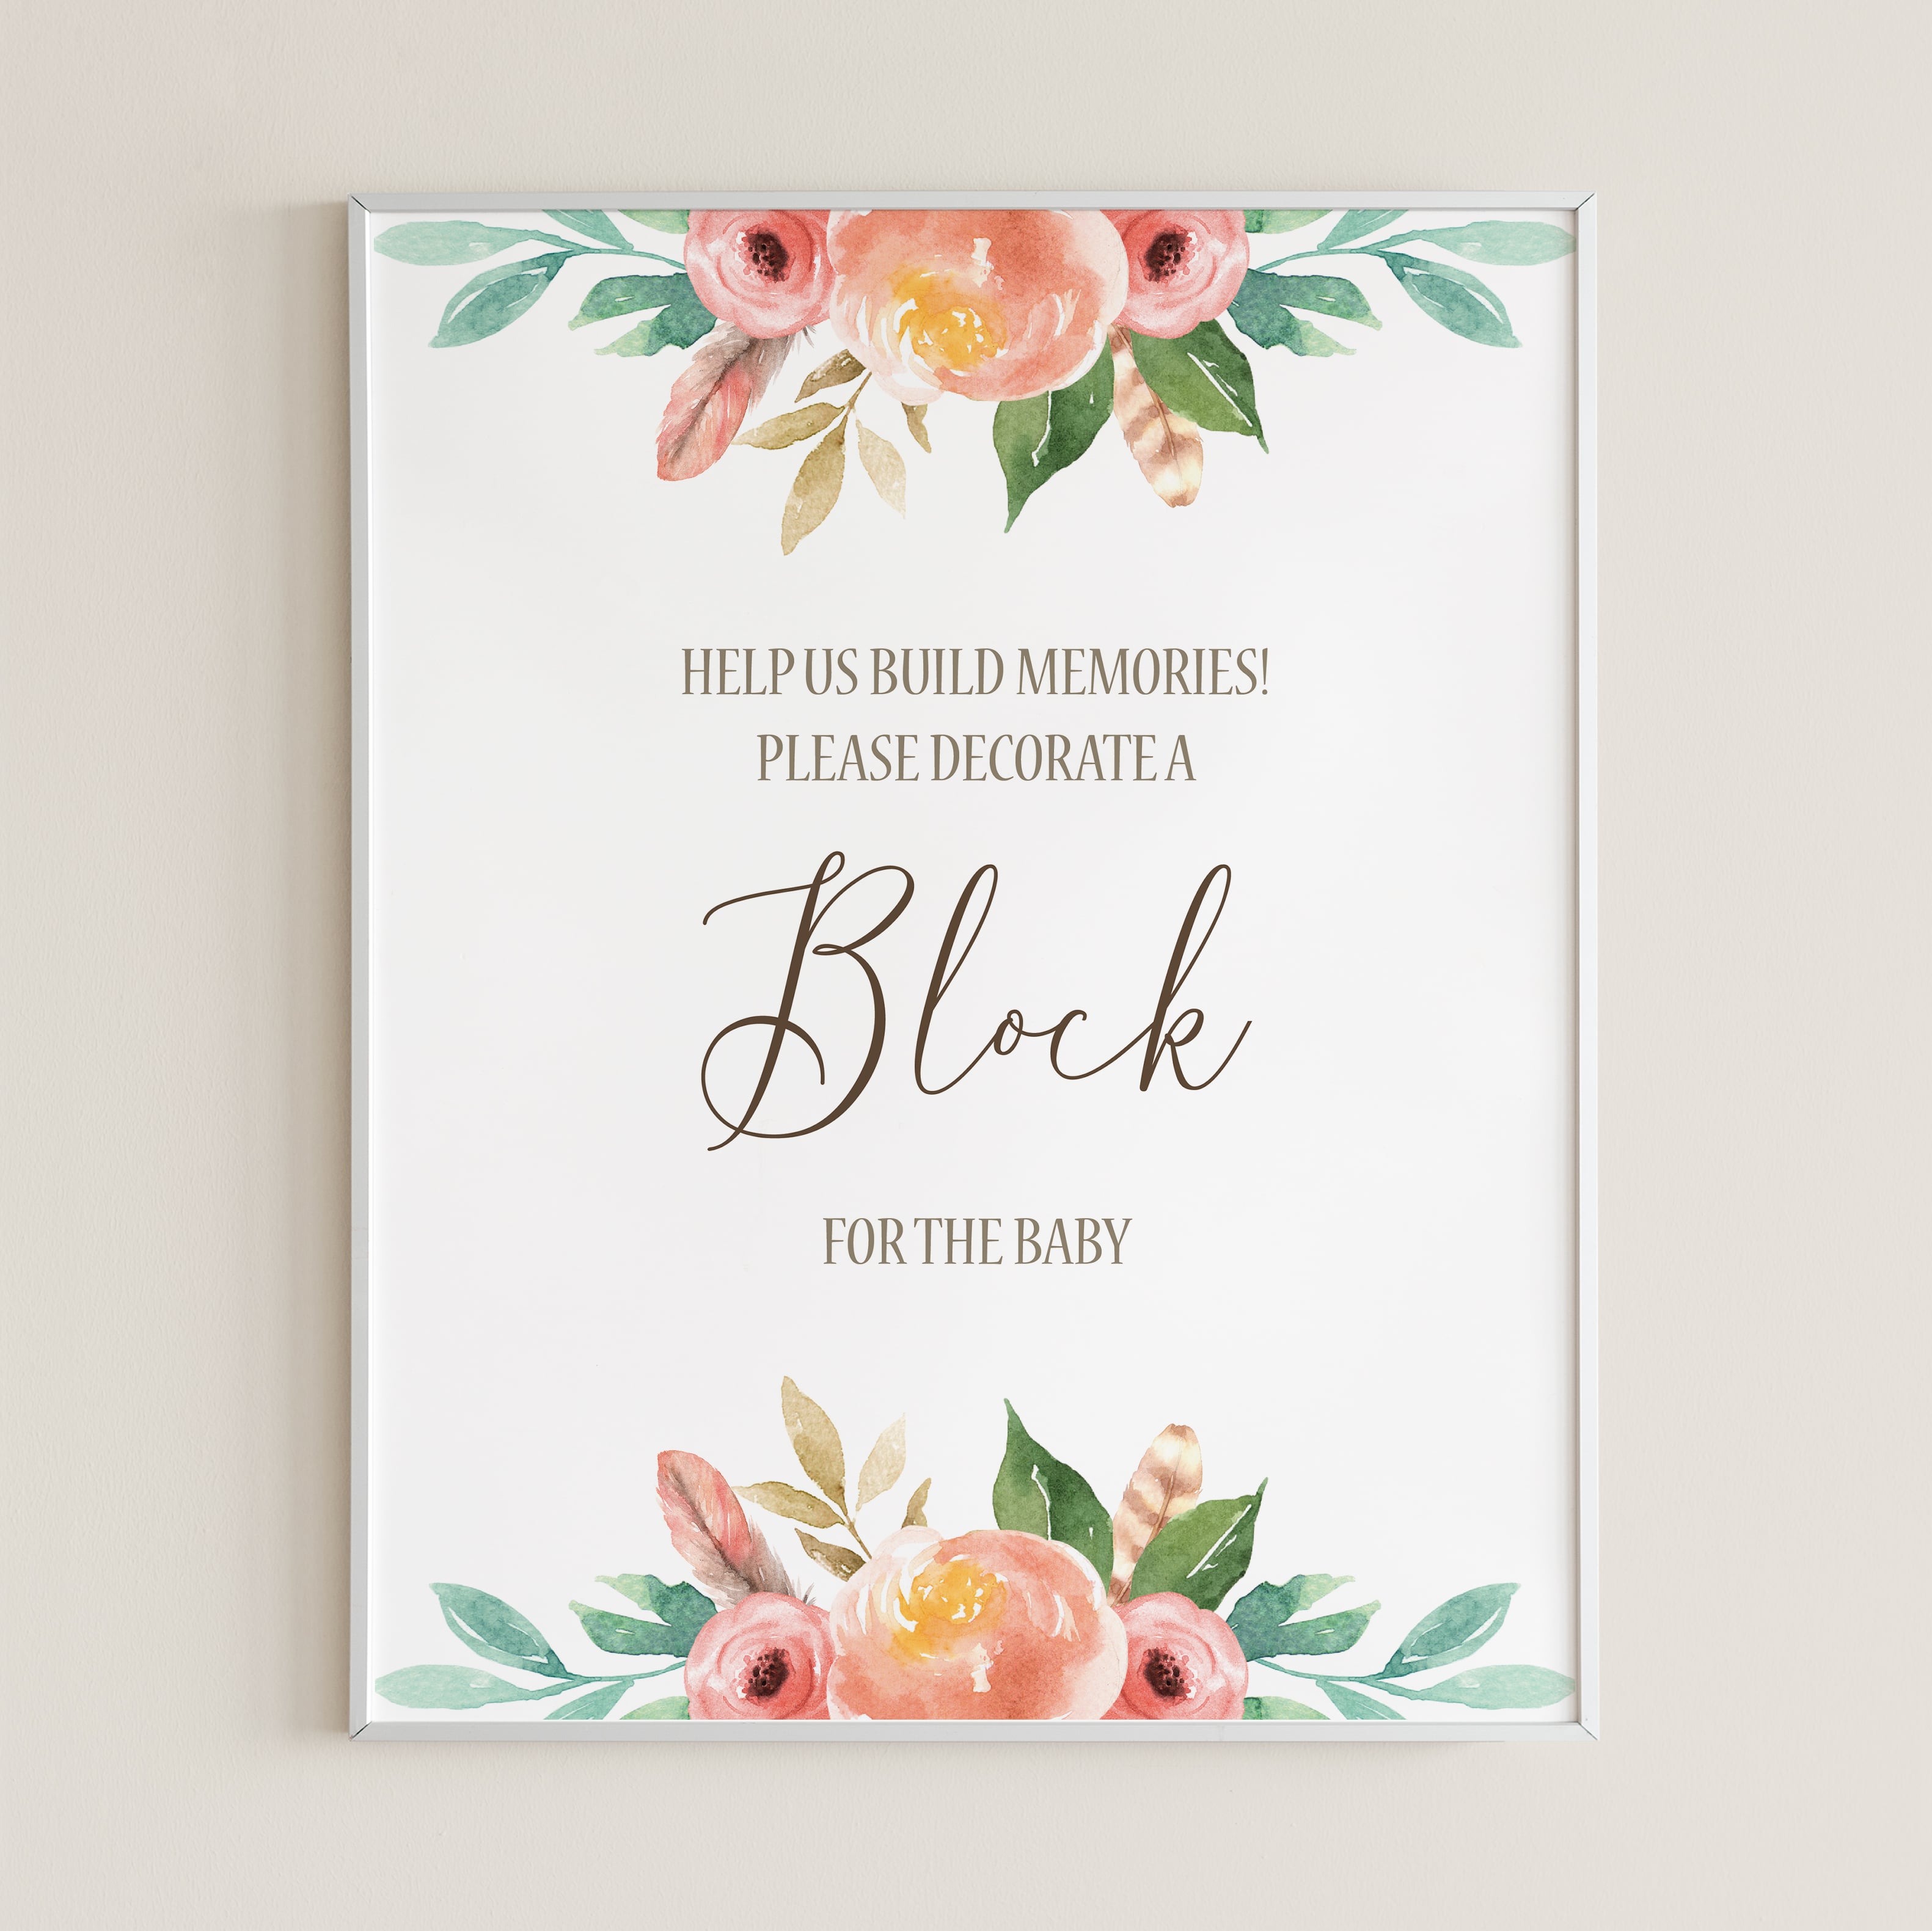 Build memories decorate a block for baby sign  by LittleSizzle